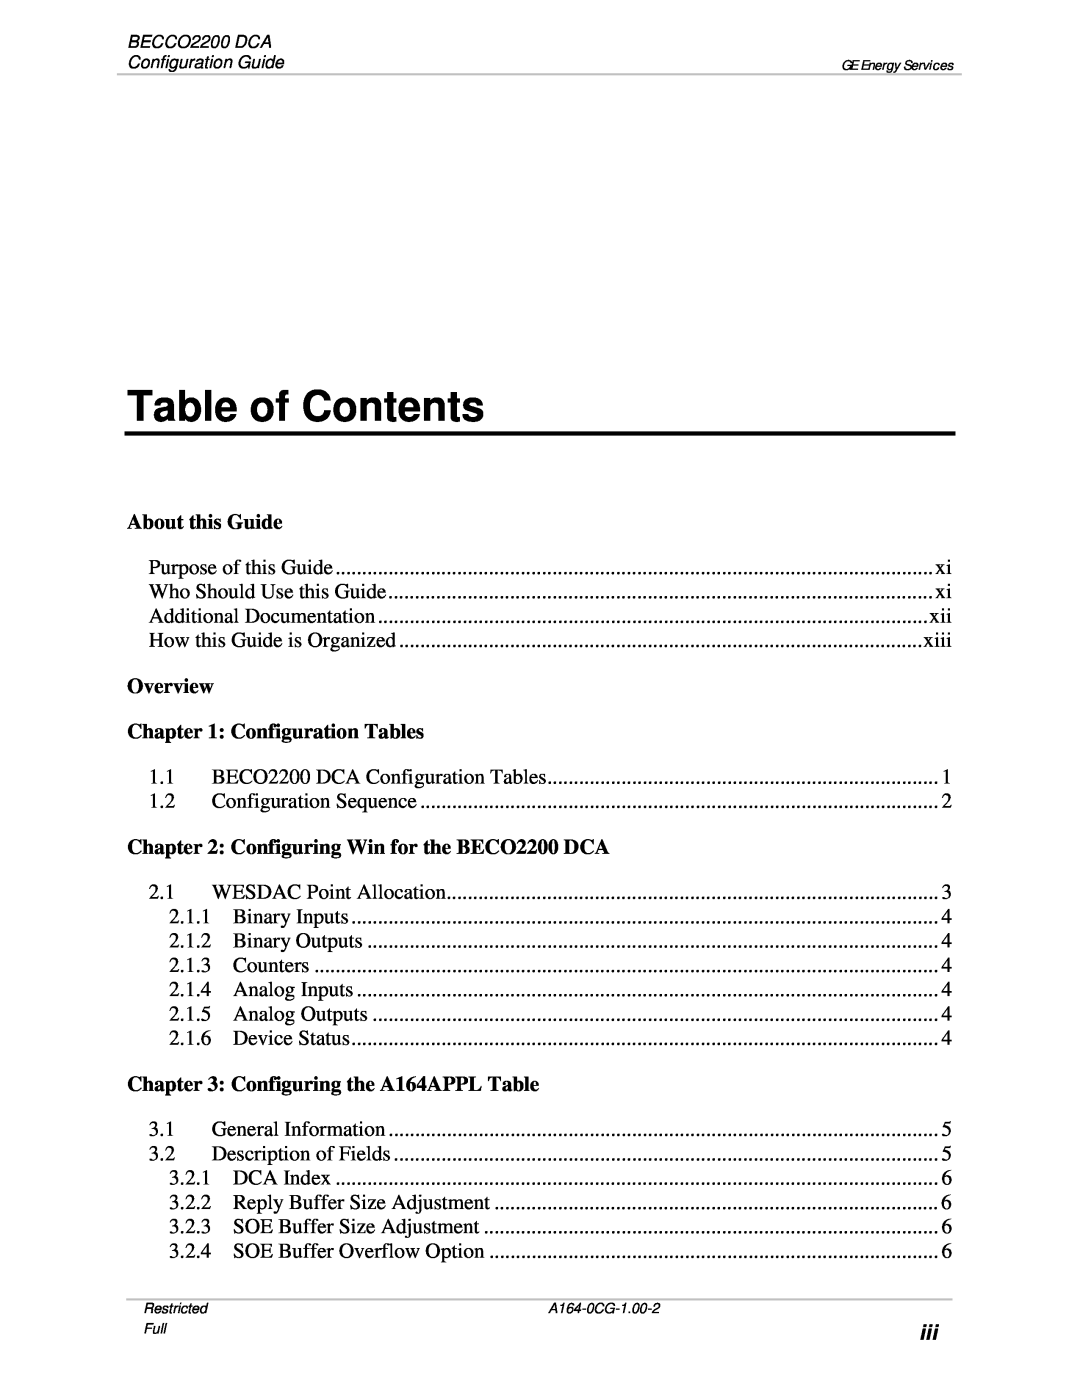 GE BECCO2200 Table of Contents, About this Guide, Overview, Configuration Tables, Configuring Win for the BECO2200 DCA 